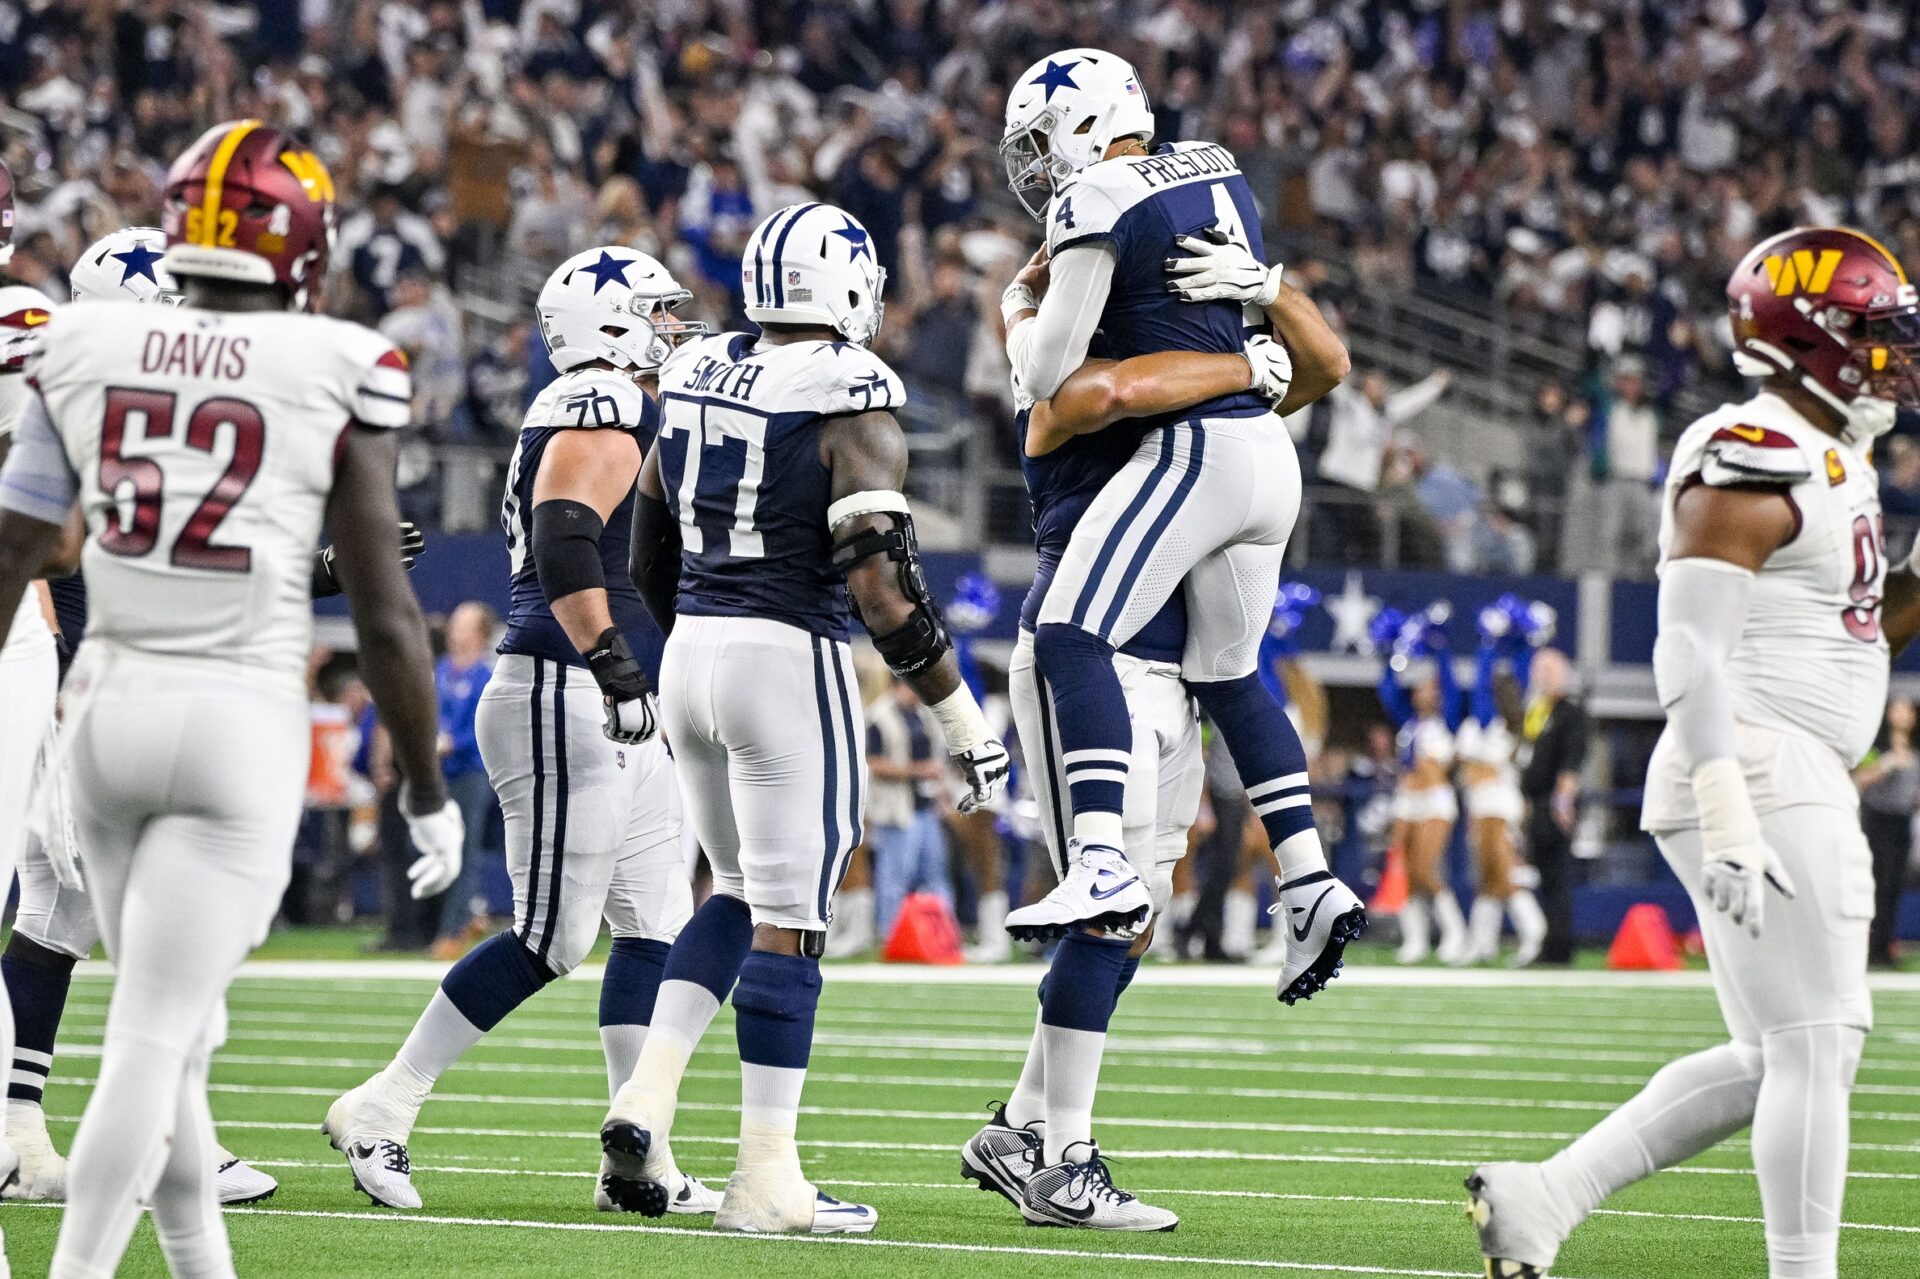 Dallas Cowboys quarterback Dak Prescott (4) celebrates with offensive tackle Tyron Smith (77) and guard Zack Martin (70) after throwing a touchdown pass against the Washington Commanders.